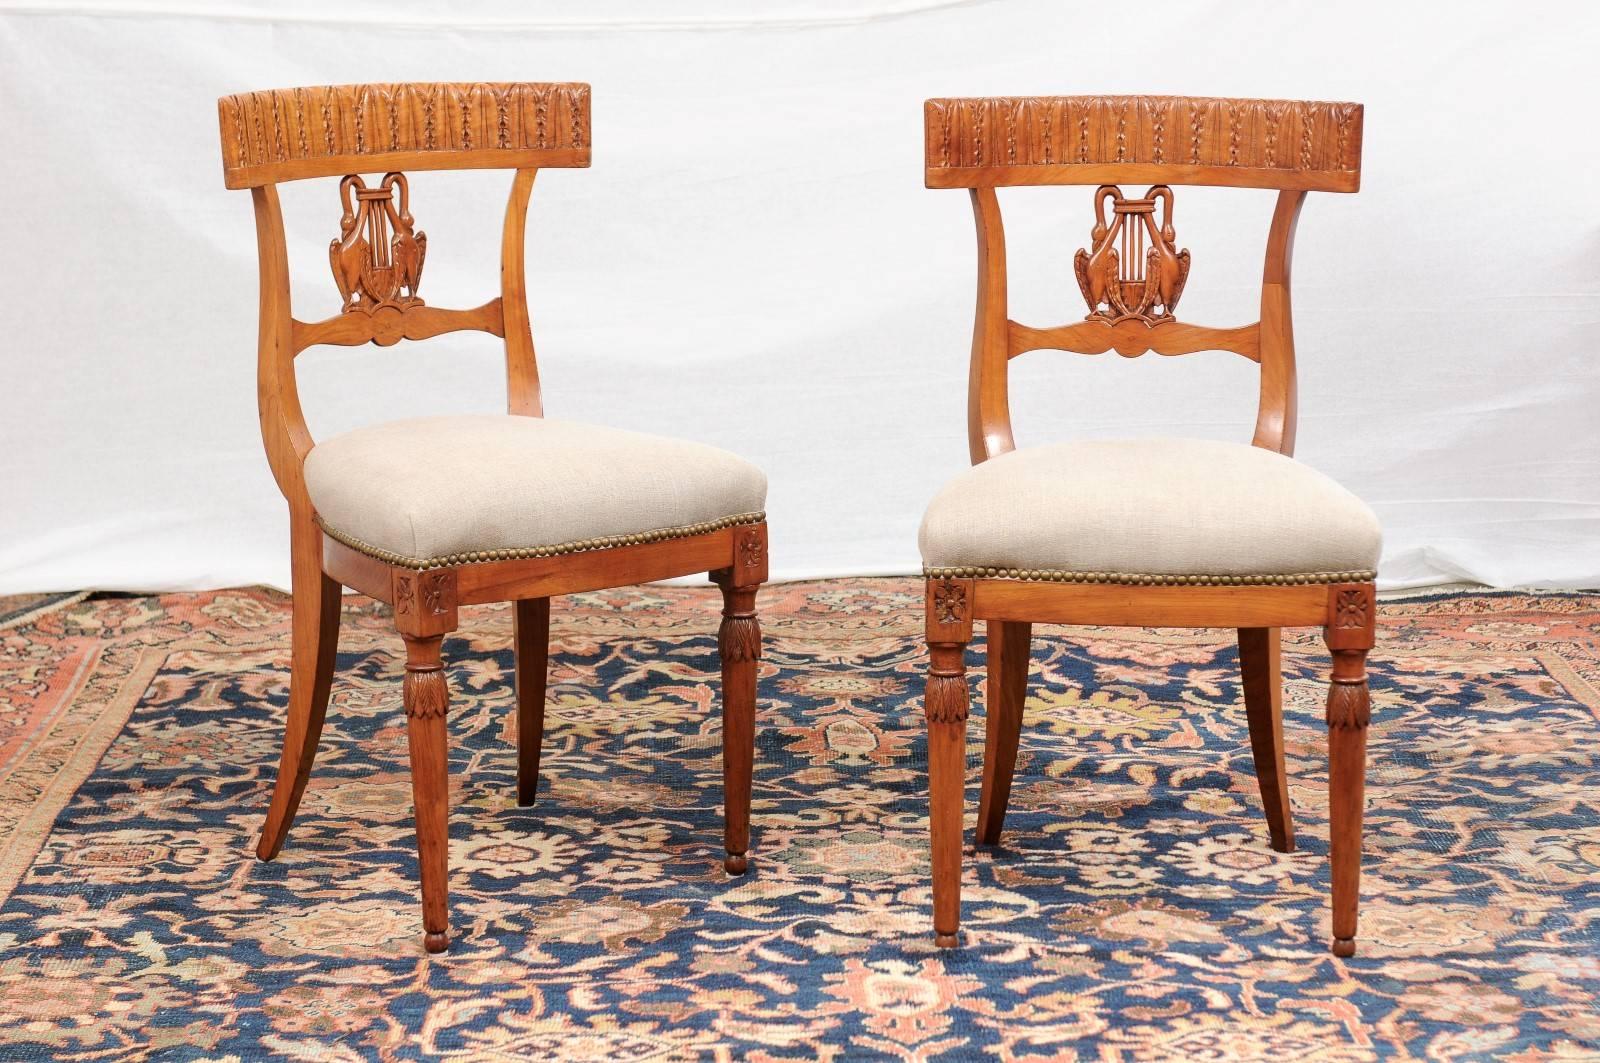 This pair of Italian Neoclassical style walnut side chairs from the mid-19th century features slightly concave pierced backs, marrying perfectly the sitter's body. On each chair, the top rail is carved with a delicate succession of stylized